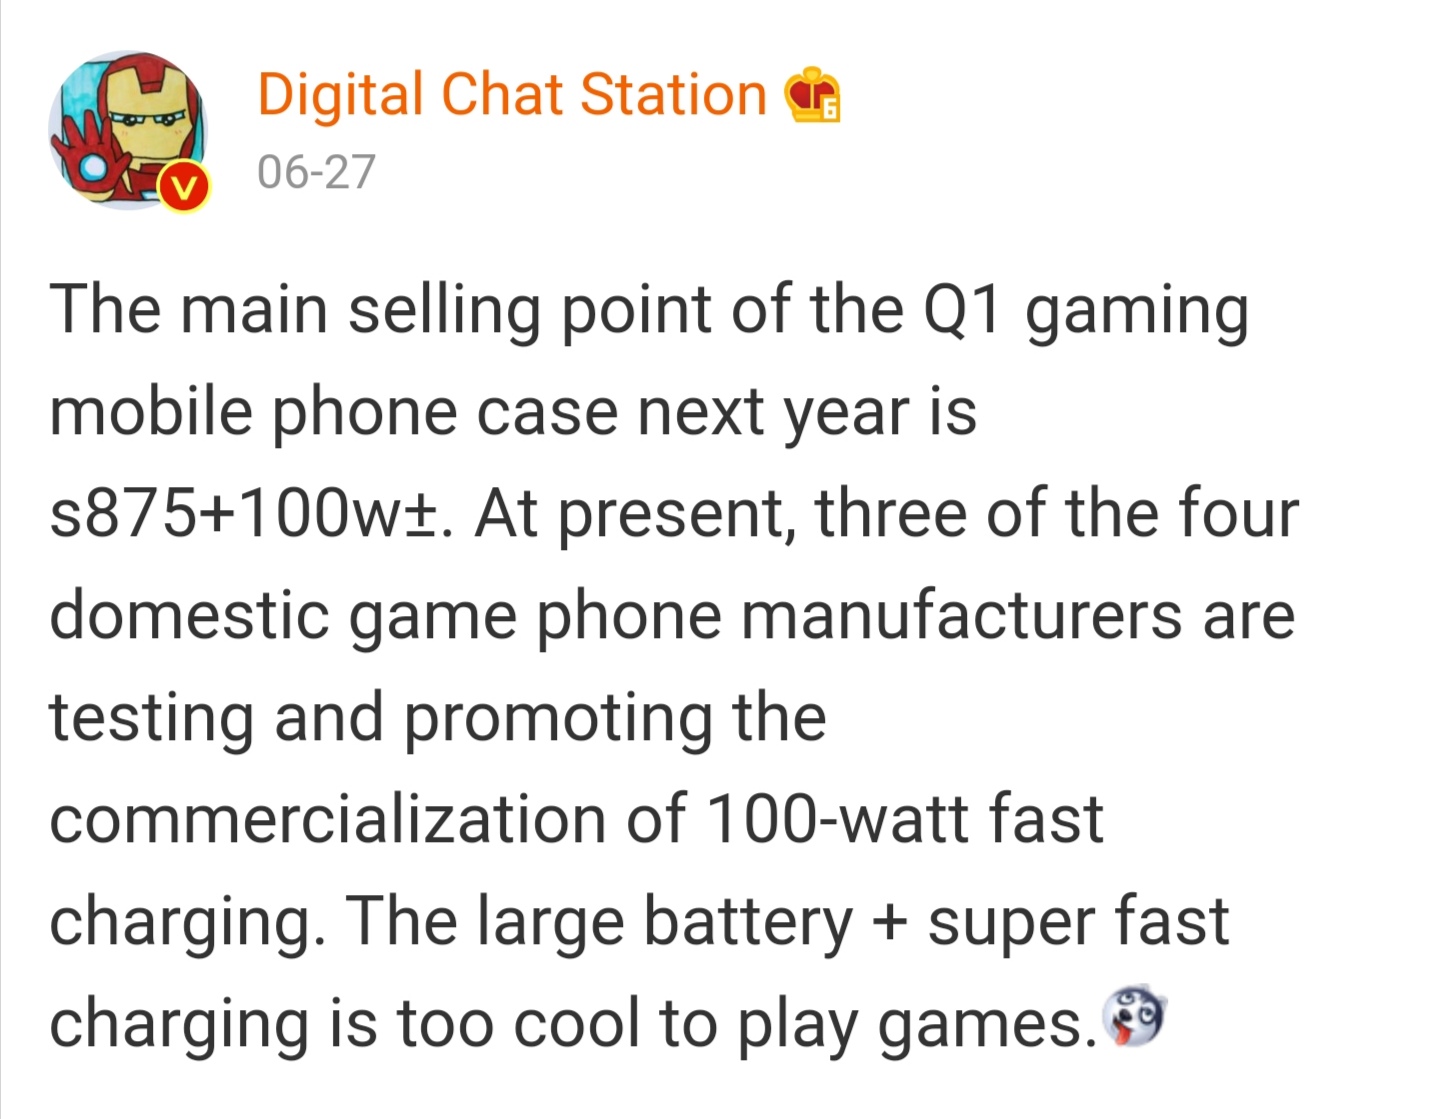 A new leak points to 100W charging in 2021.